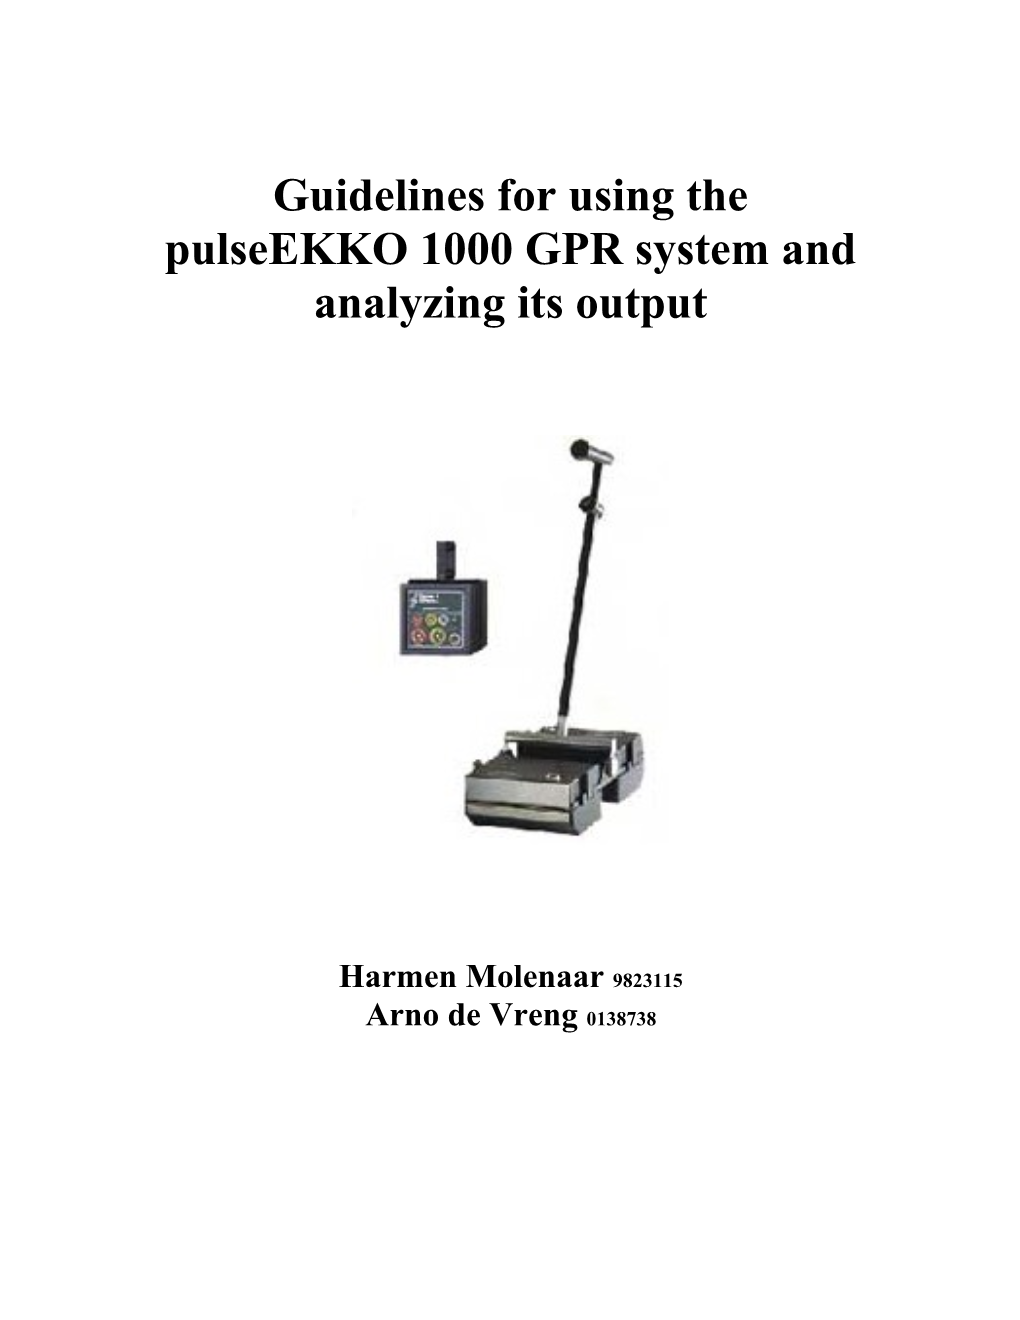 Guidelines for Using the Pulseekko 1000 GPR System and Analyzing Its Output